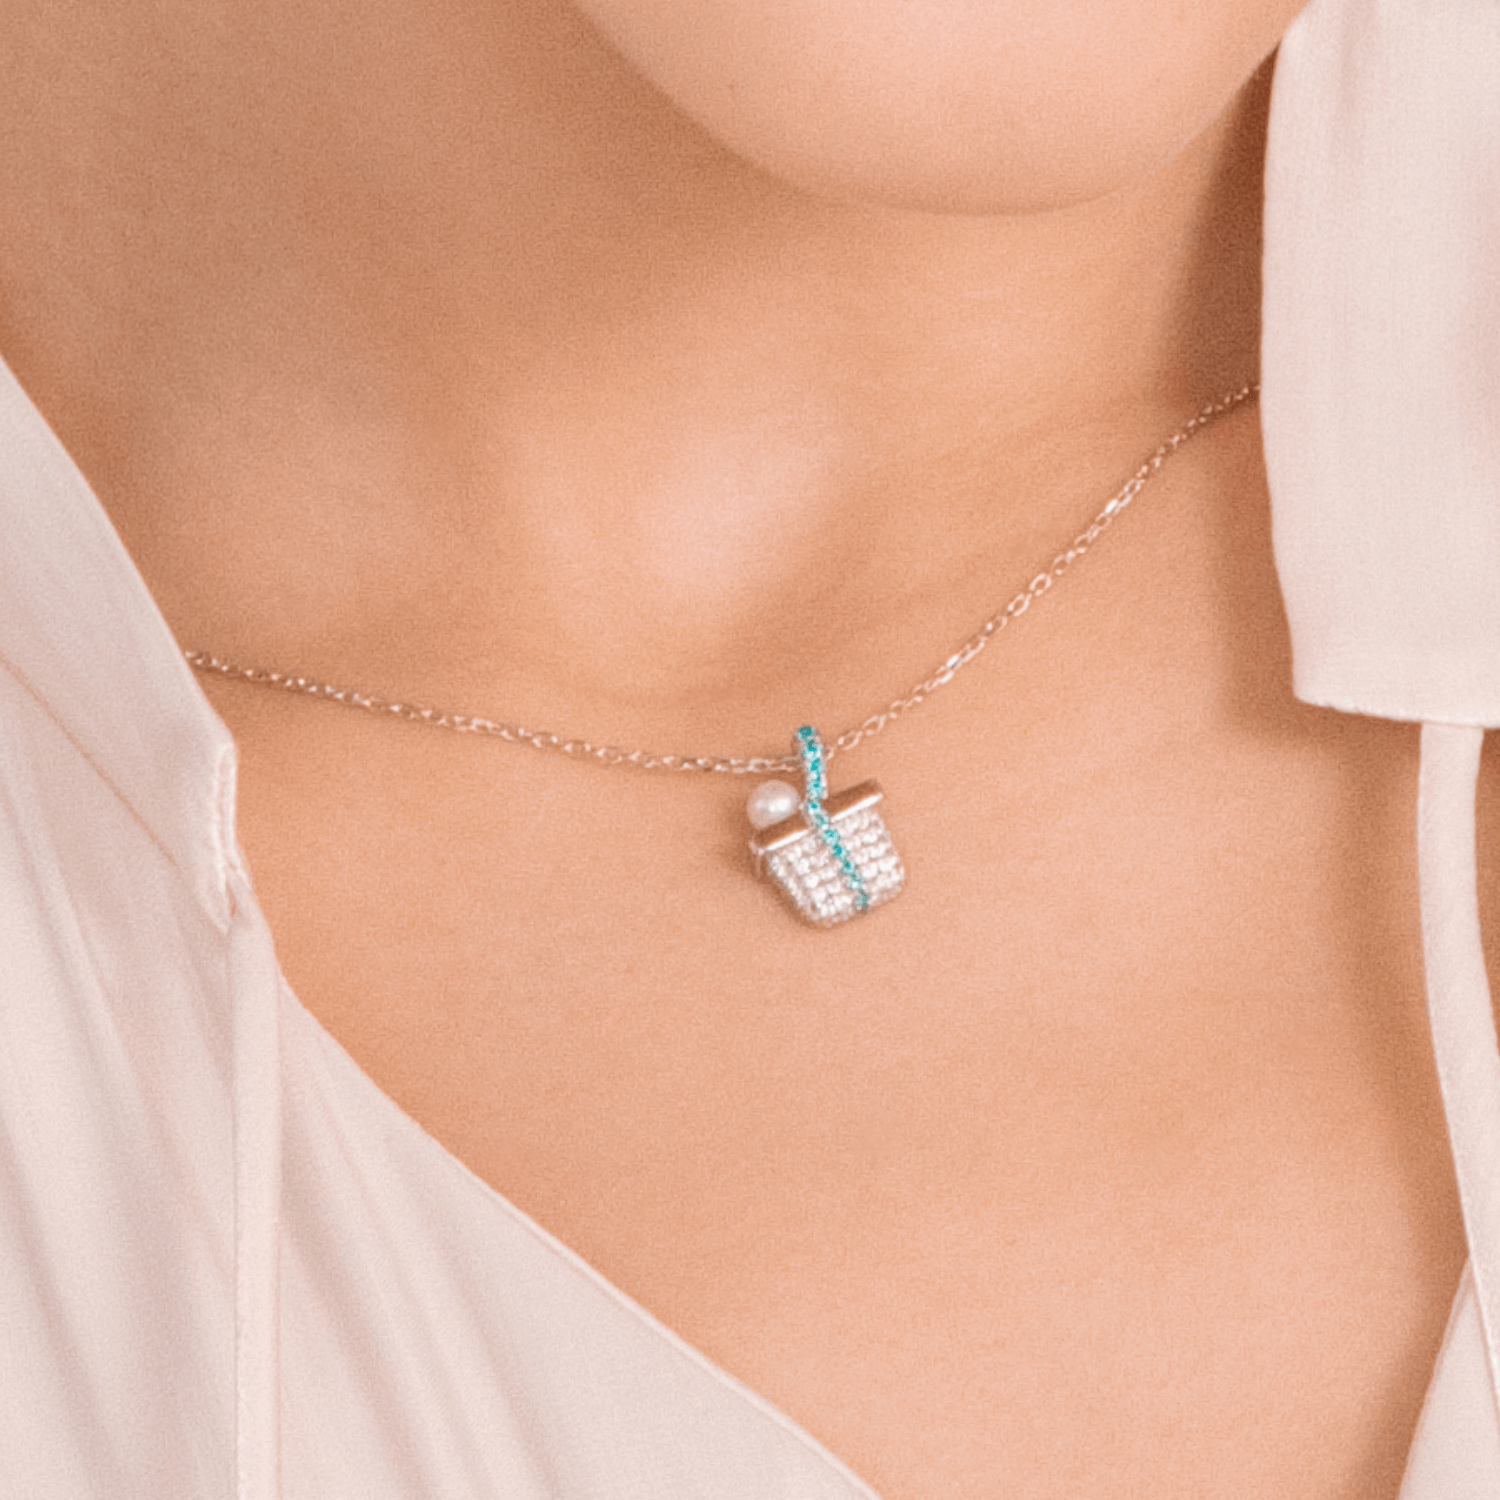 Gift Pendant Necklace